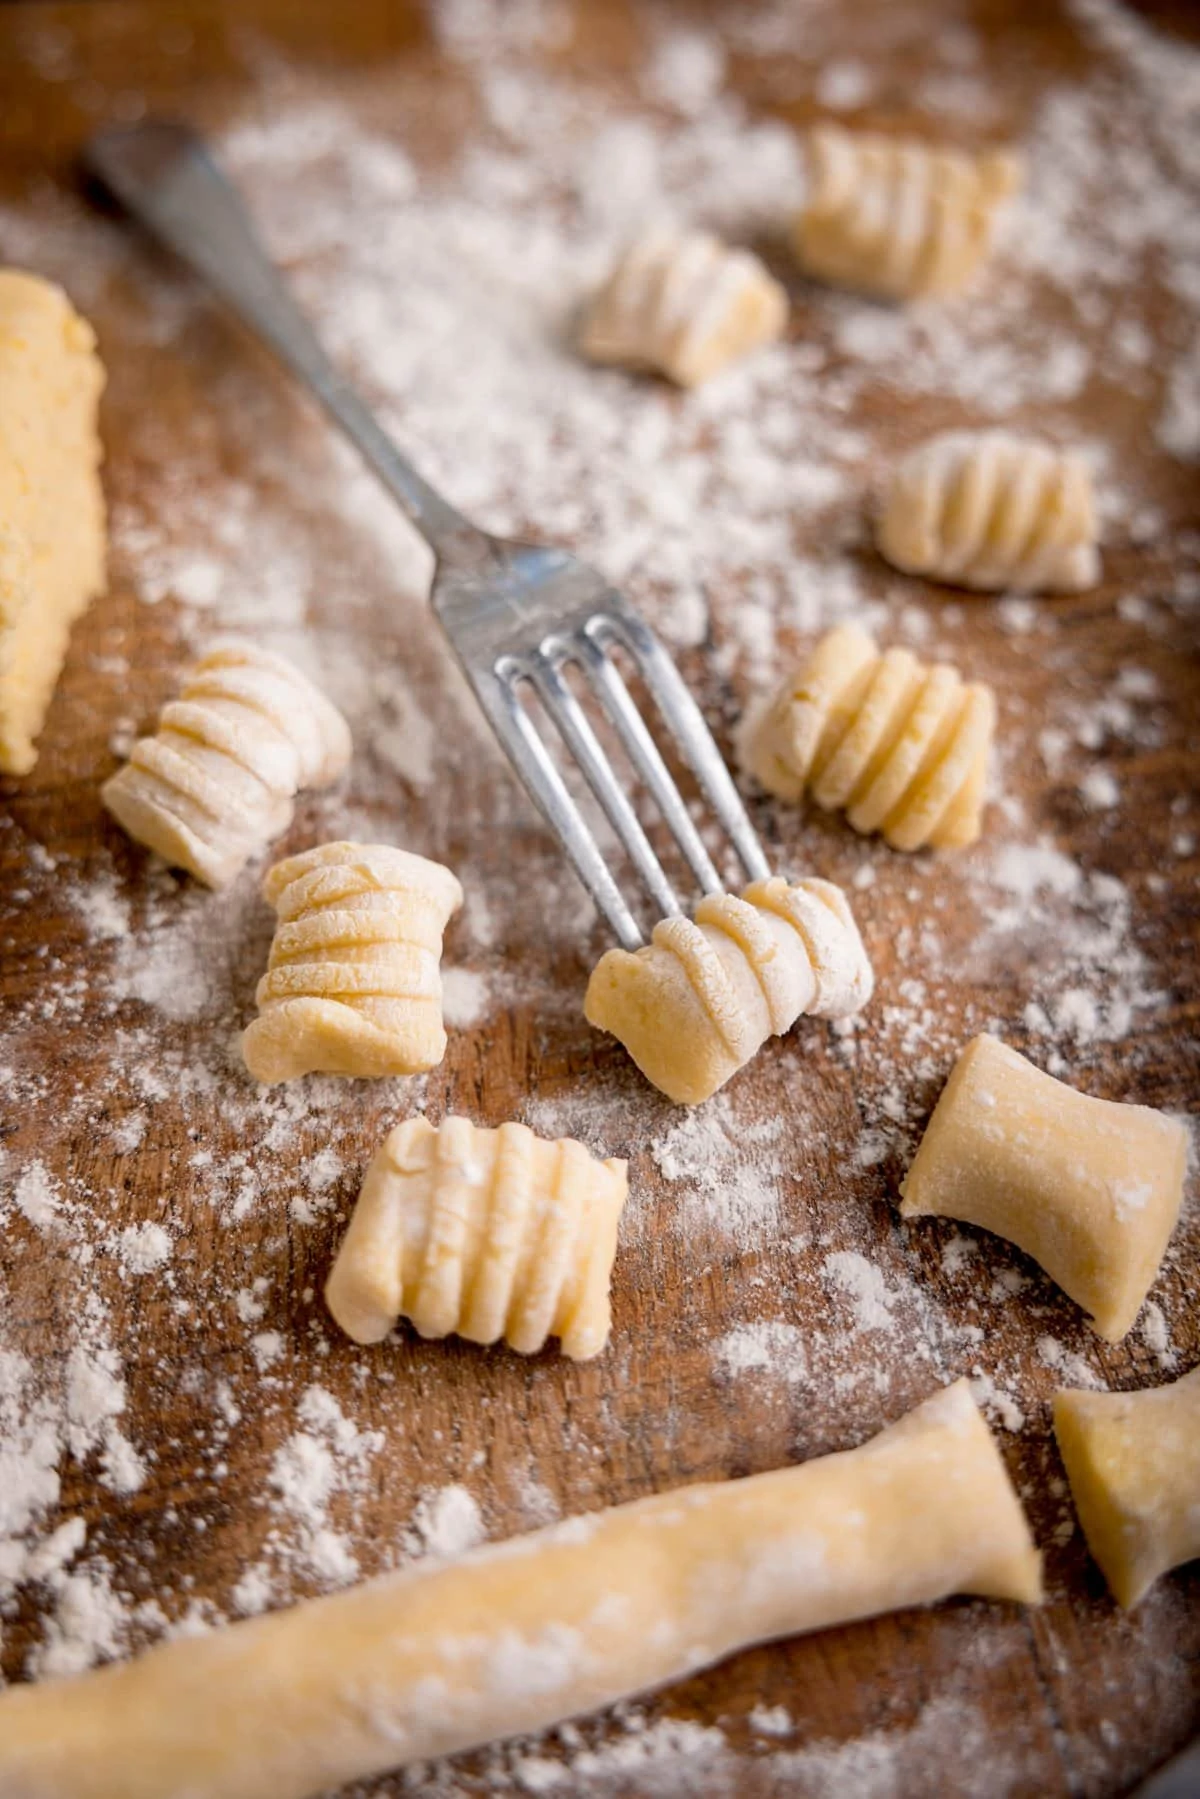 Gnocchi being shaped using the back of a fork on a floured board. There are pieces of gnocchi around the fork.